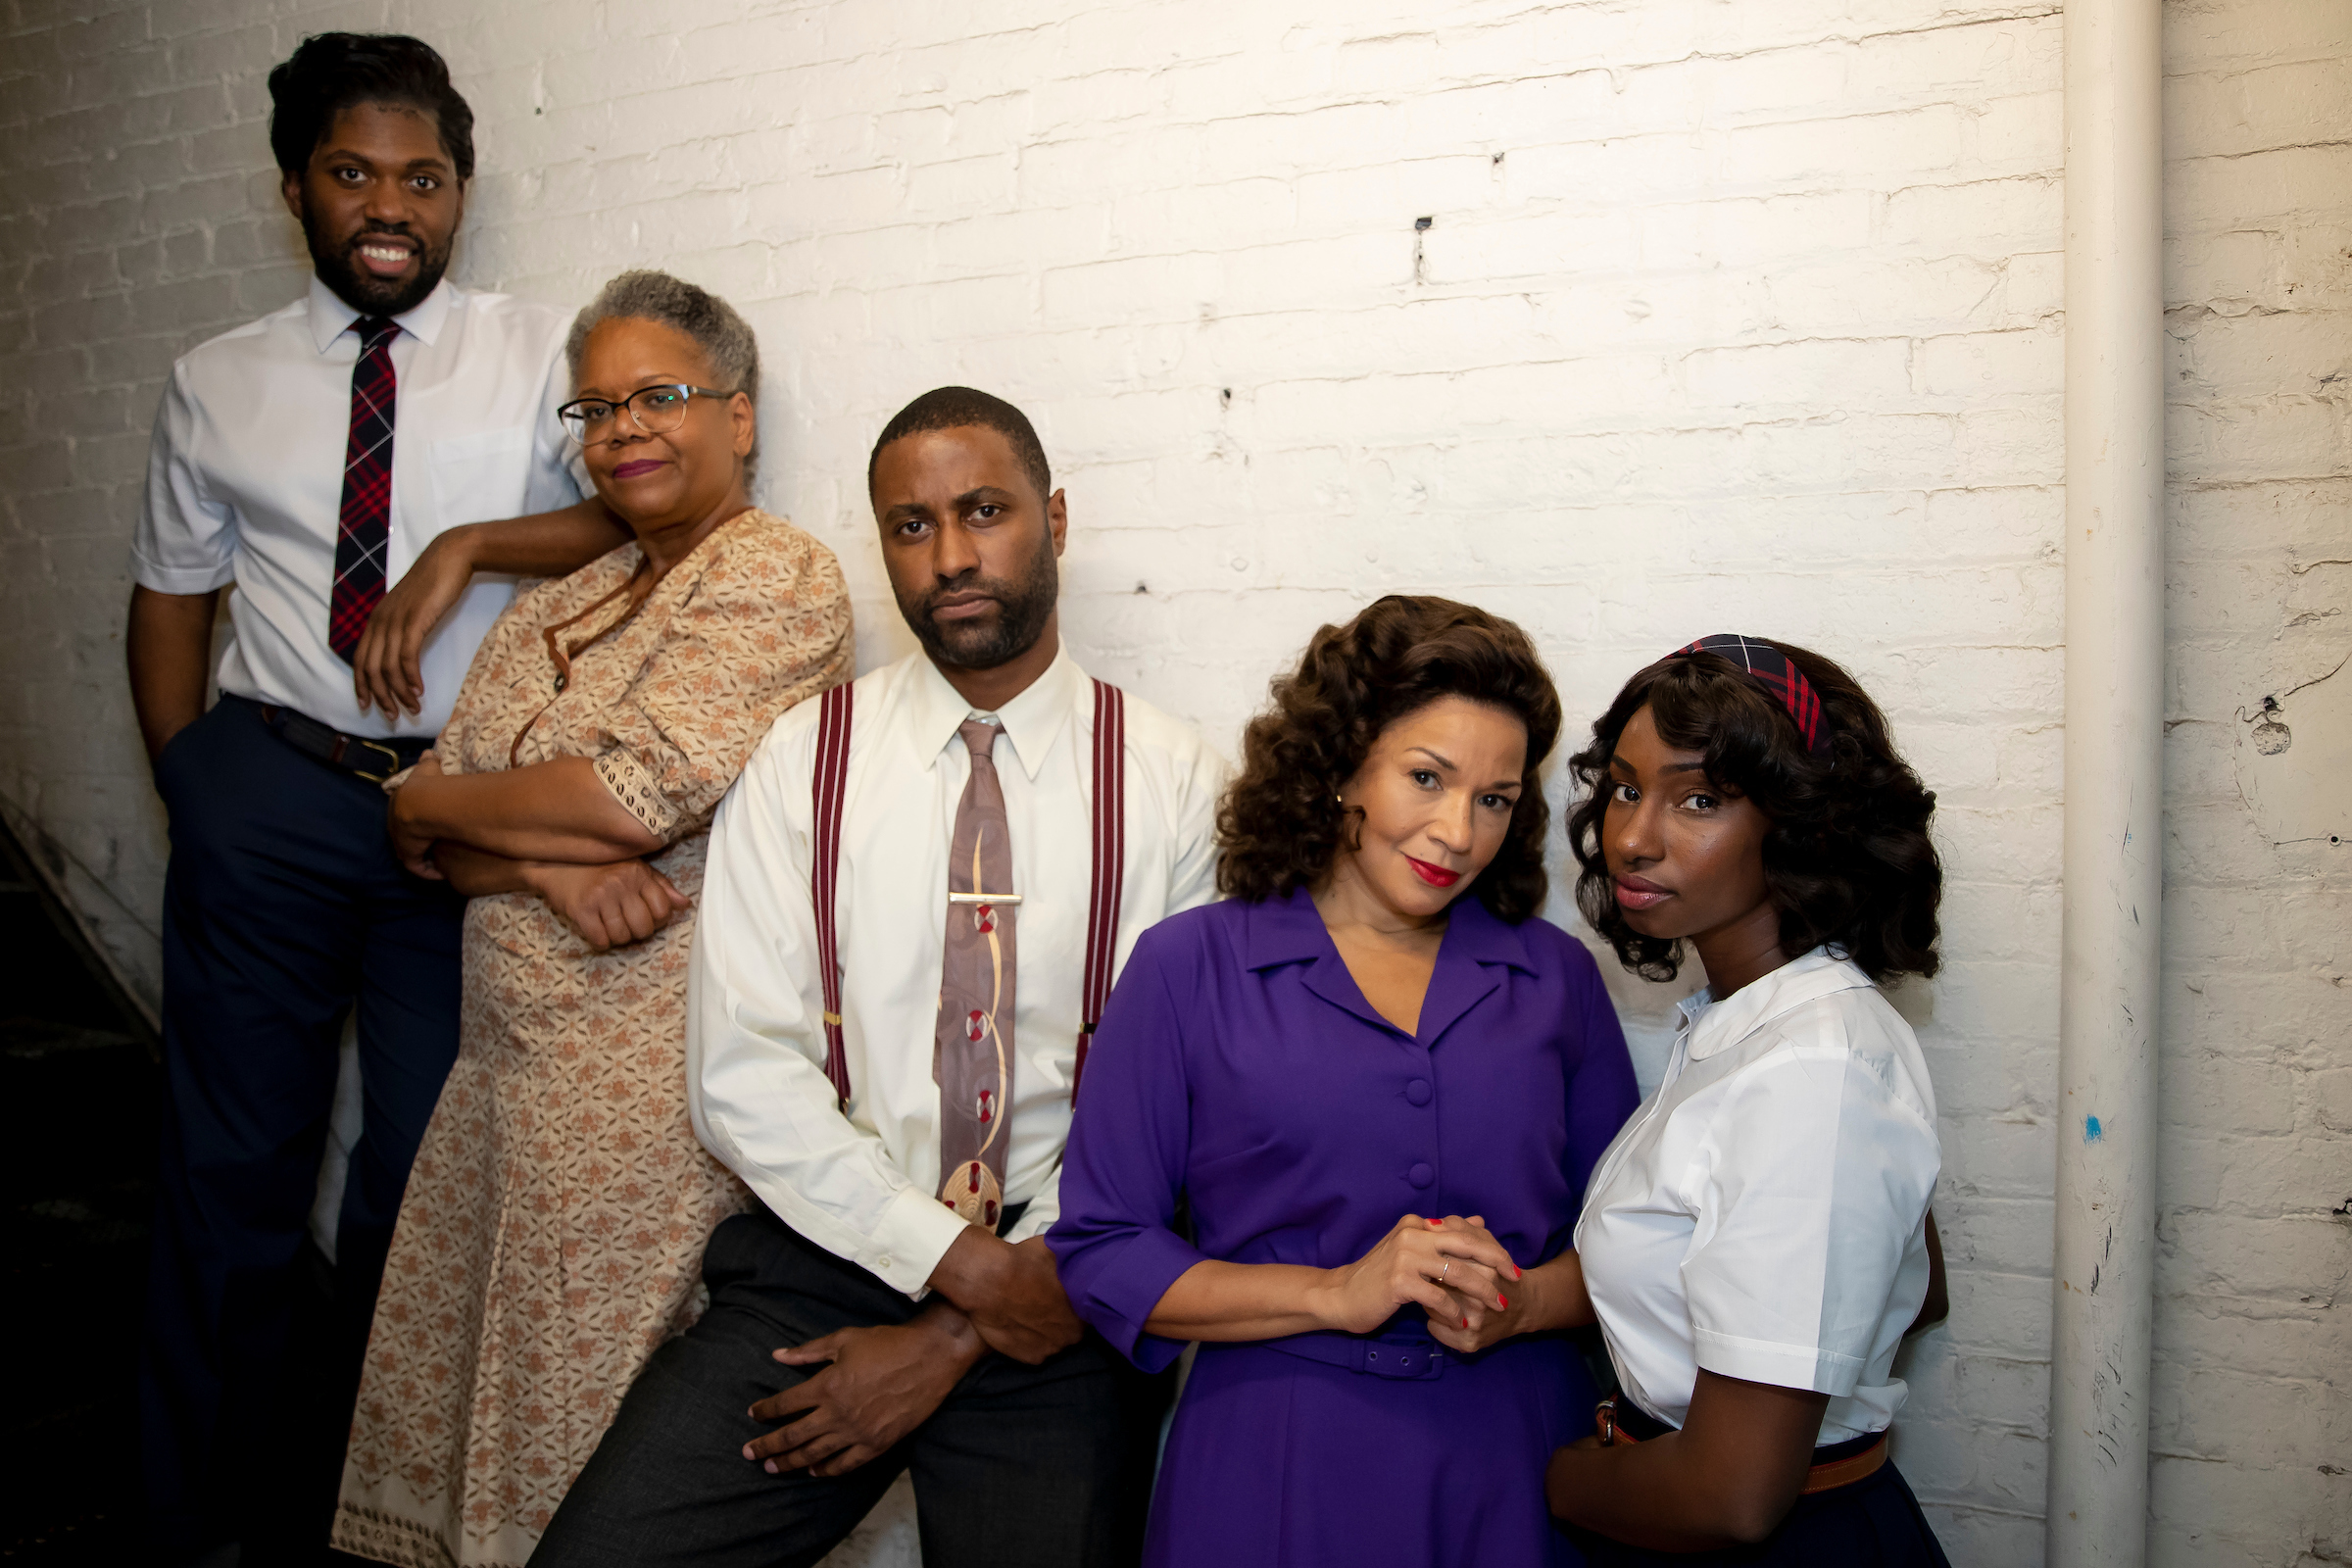 Cast of The October Storm:
Pictured left to right
Trevor Latez Hayes (Crutch), Patricia R. Floyd (Lucille), Philipe D. Preston (Louis), Yvette Ganier (Mrs. Elkins) and Courtney Thomas (Gloria). Photo Credit: Rana Faure